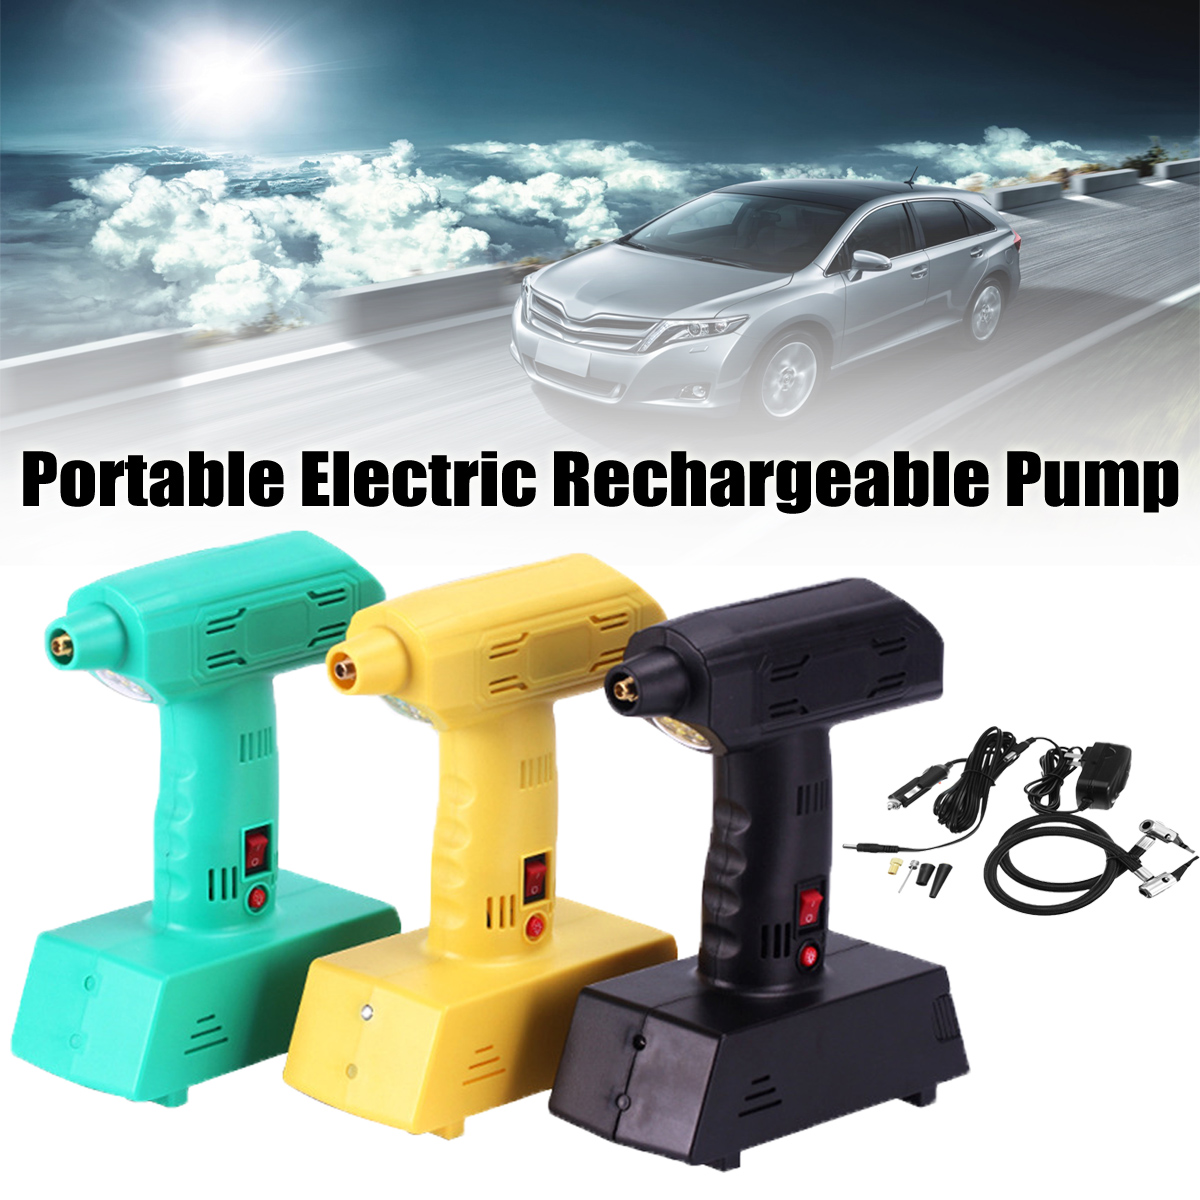 12V-Air-Compressor-Portable-Electric-Rechargeable-Pump-Cordless-Power-Inflator-with-USB-1254661-1